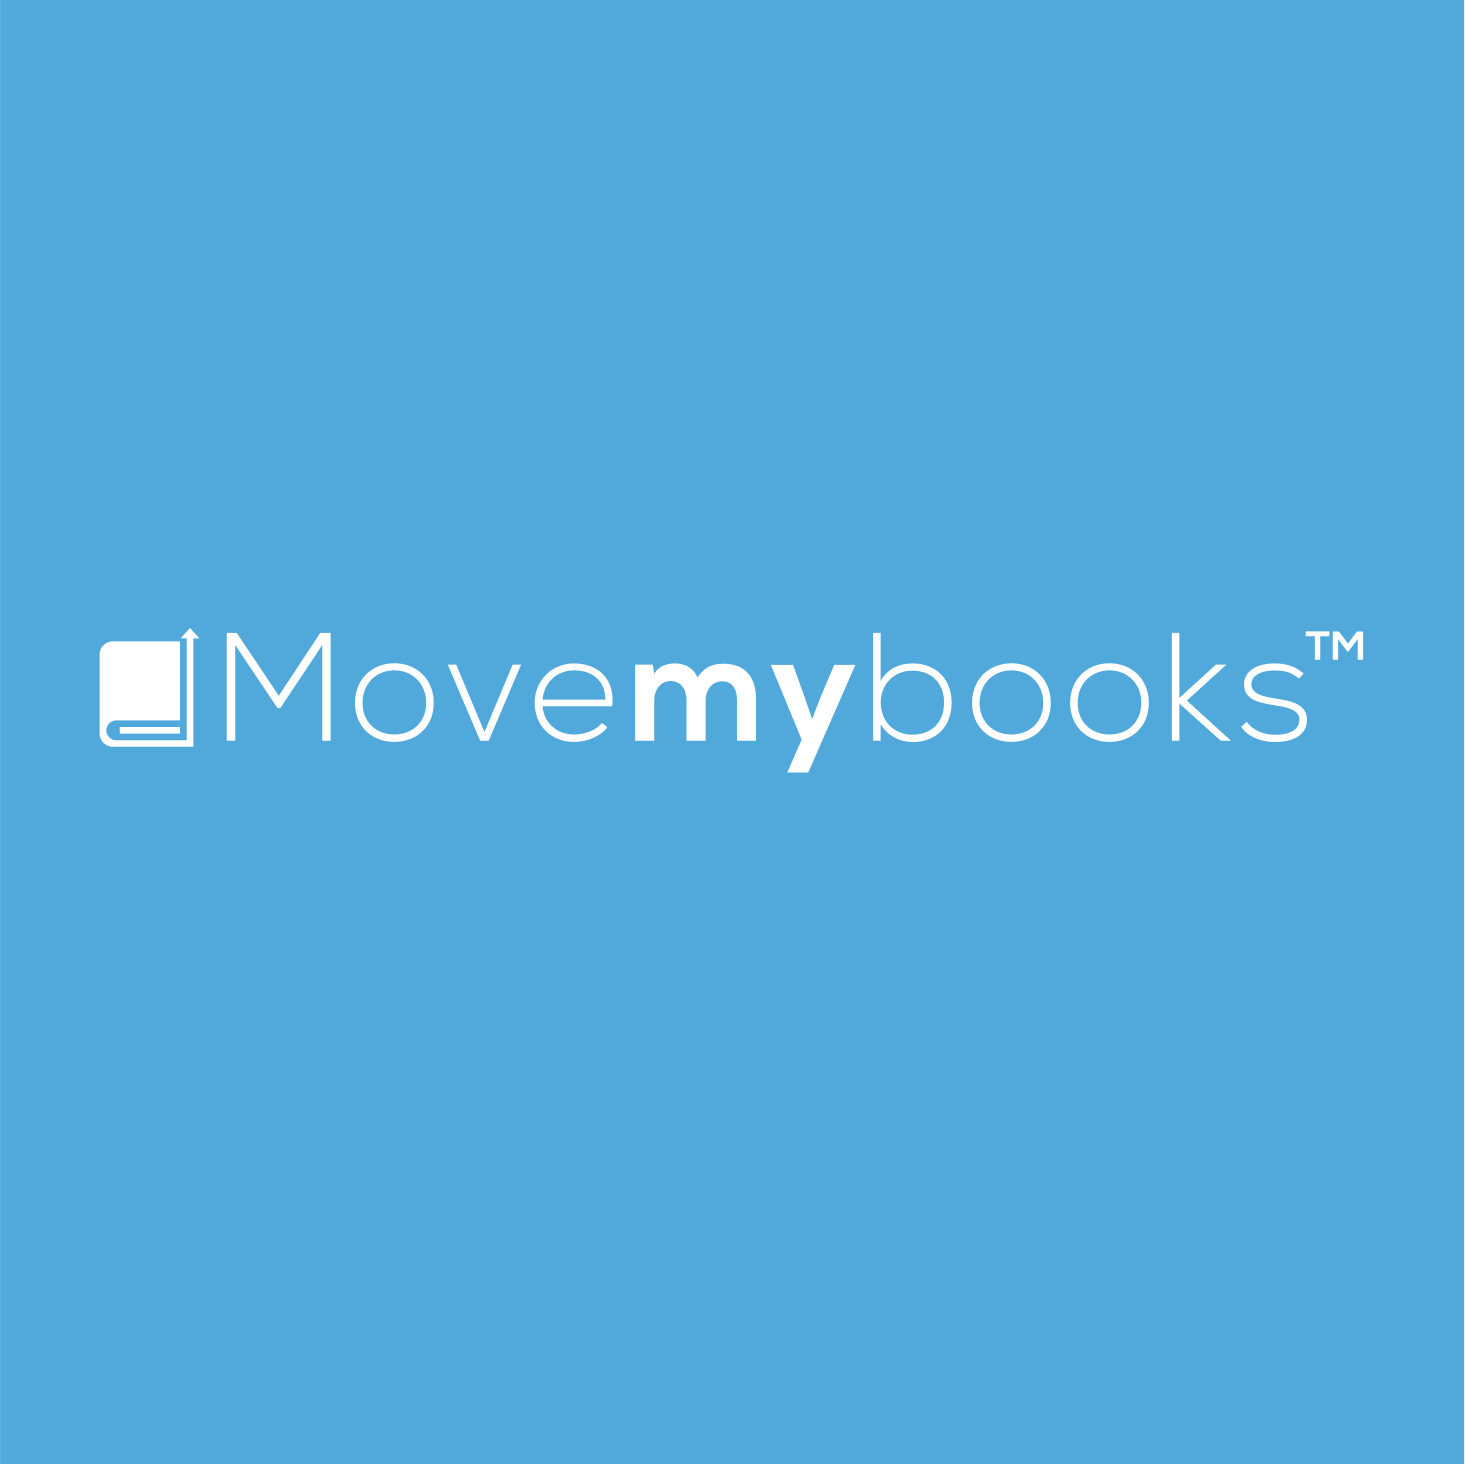 The Movemybooks logo: white text on a mid blue background